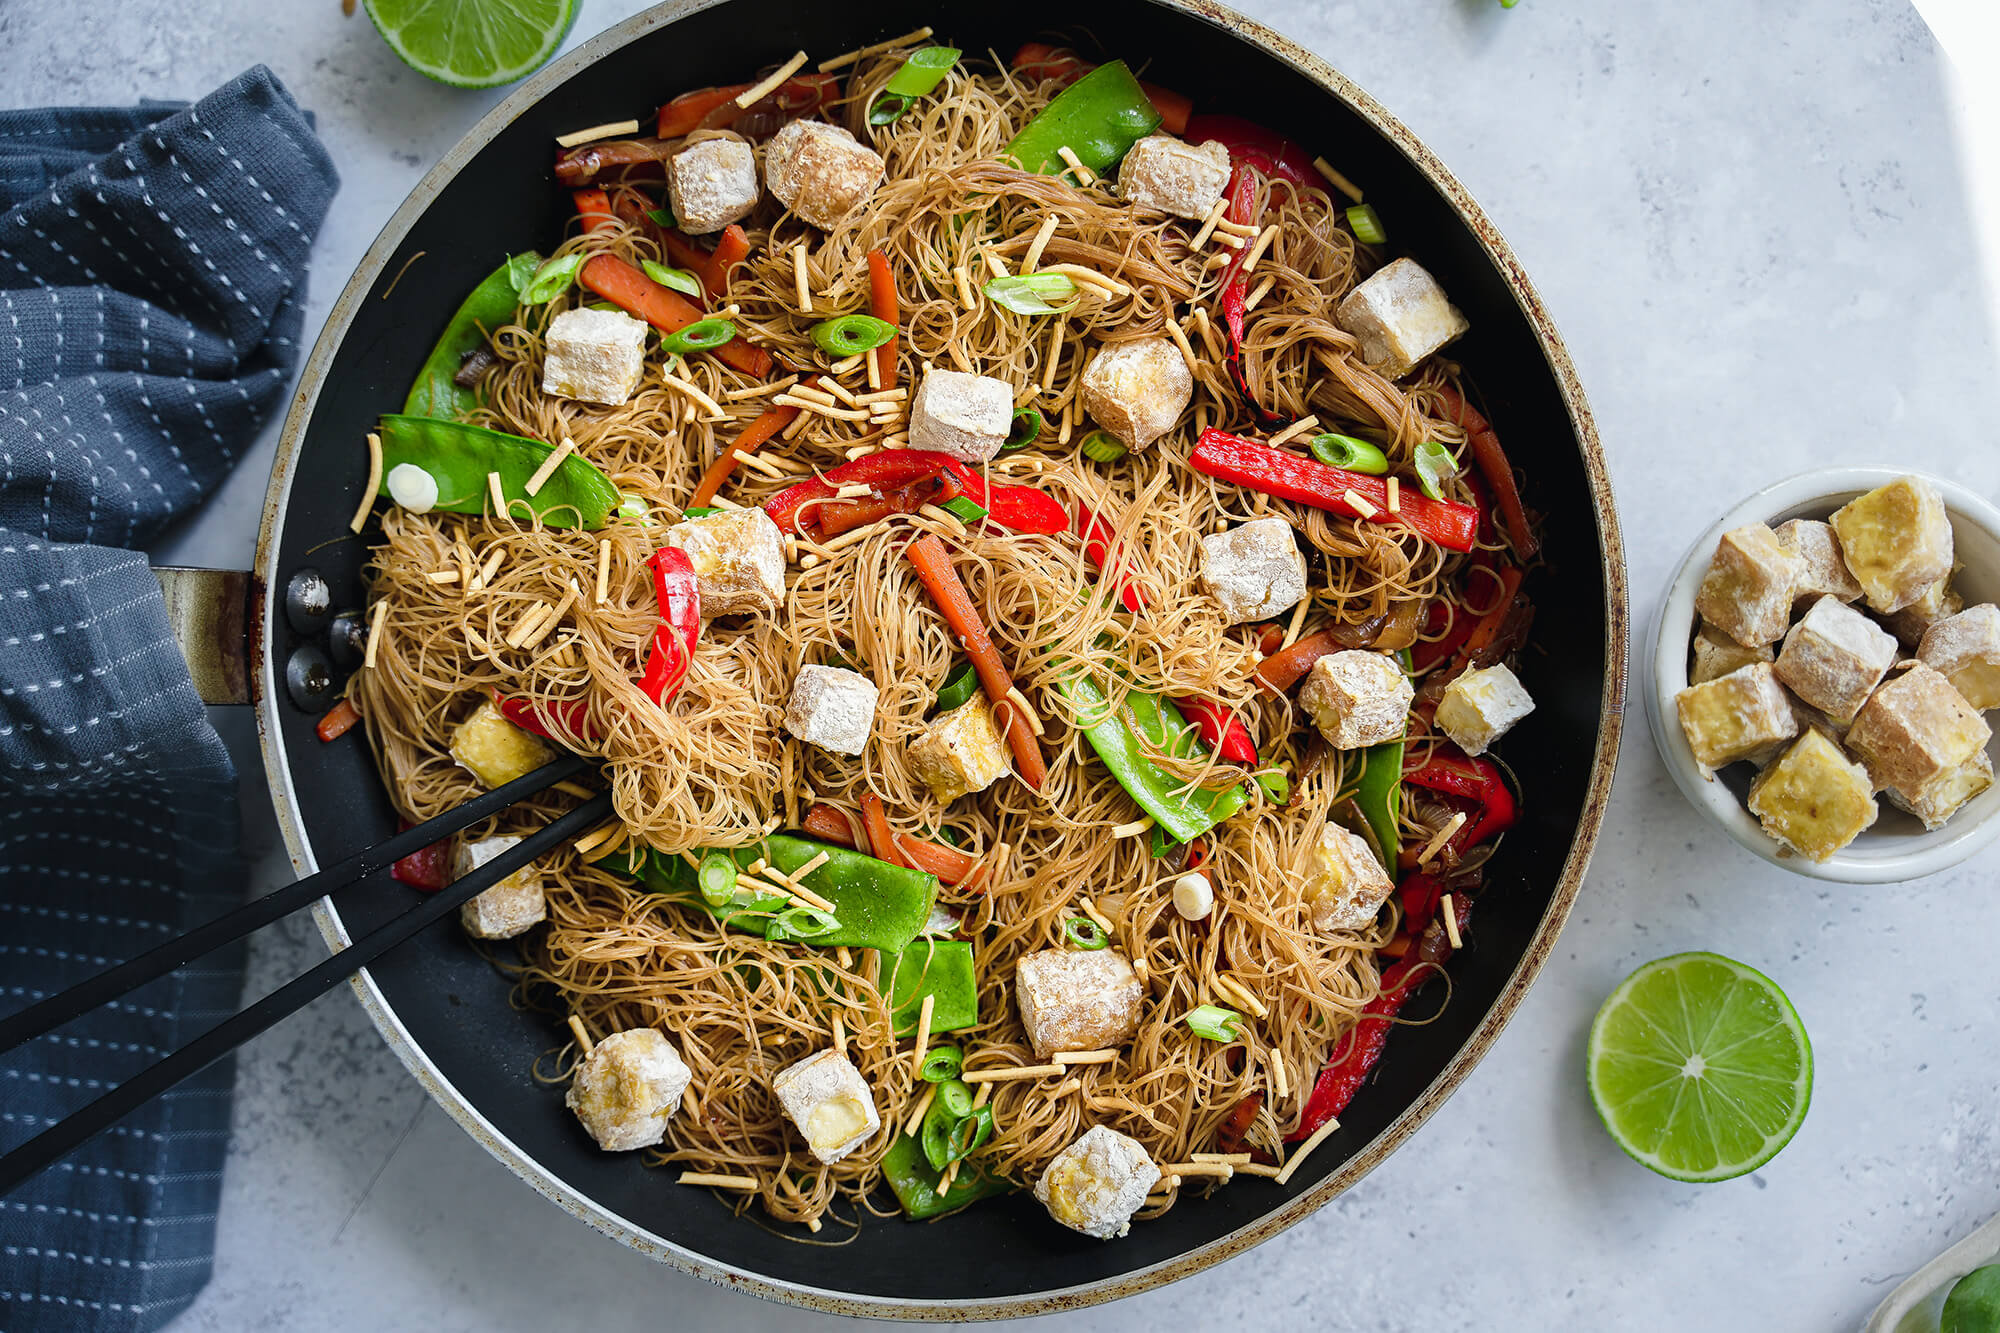 Featured image for “Singapore Noodles”